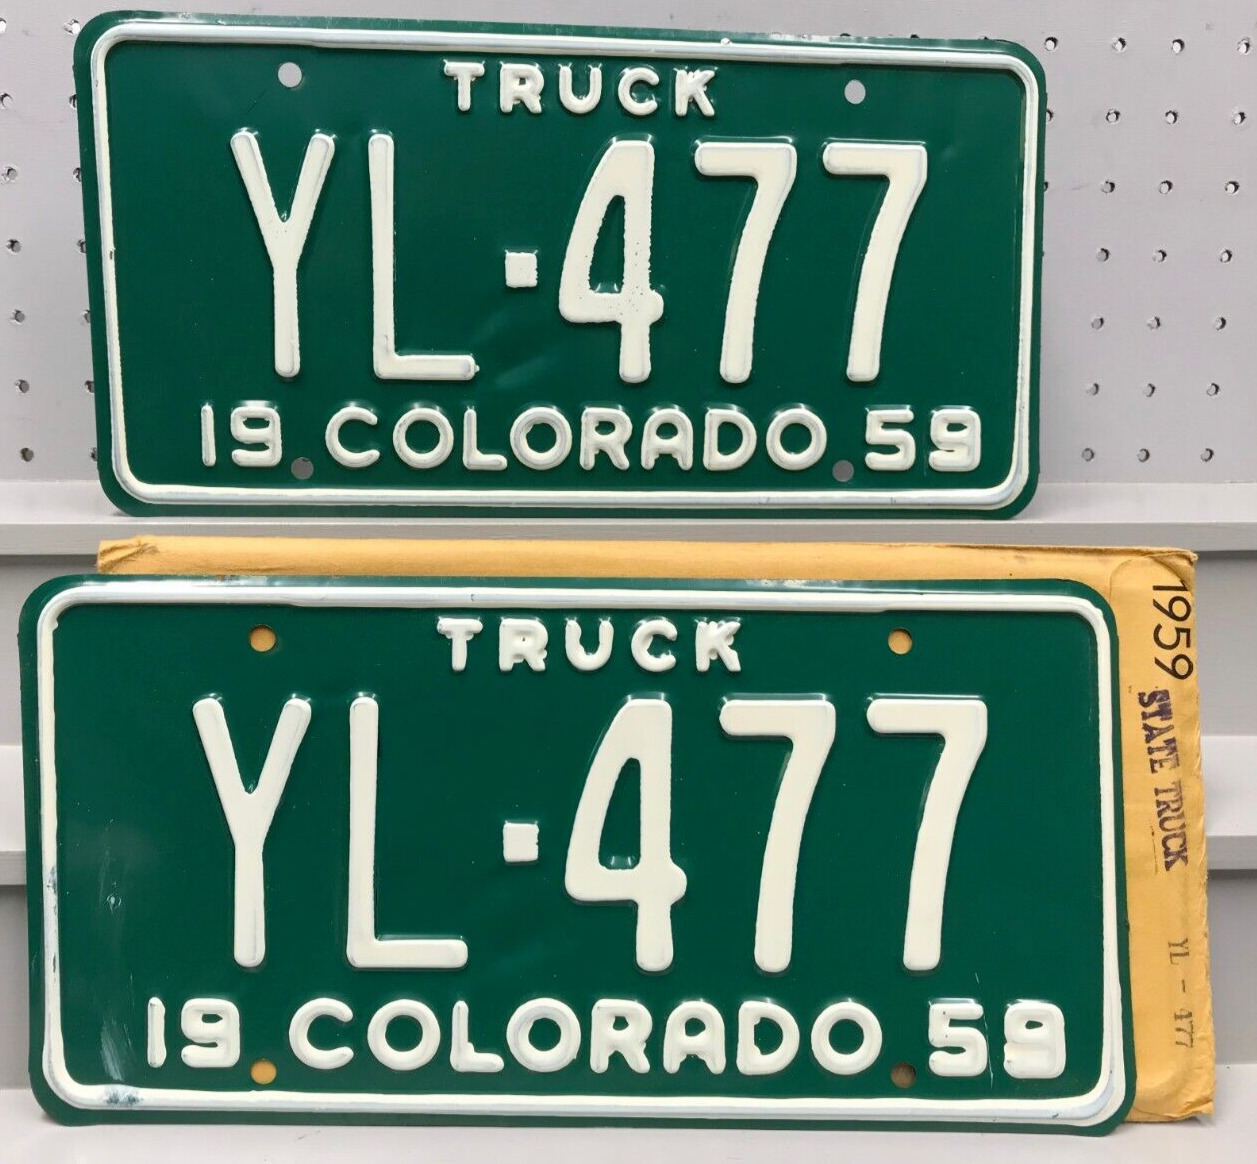 1959 NOS Colorado State Truck License Plate Pair Plates YL-477 Cripple Creek